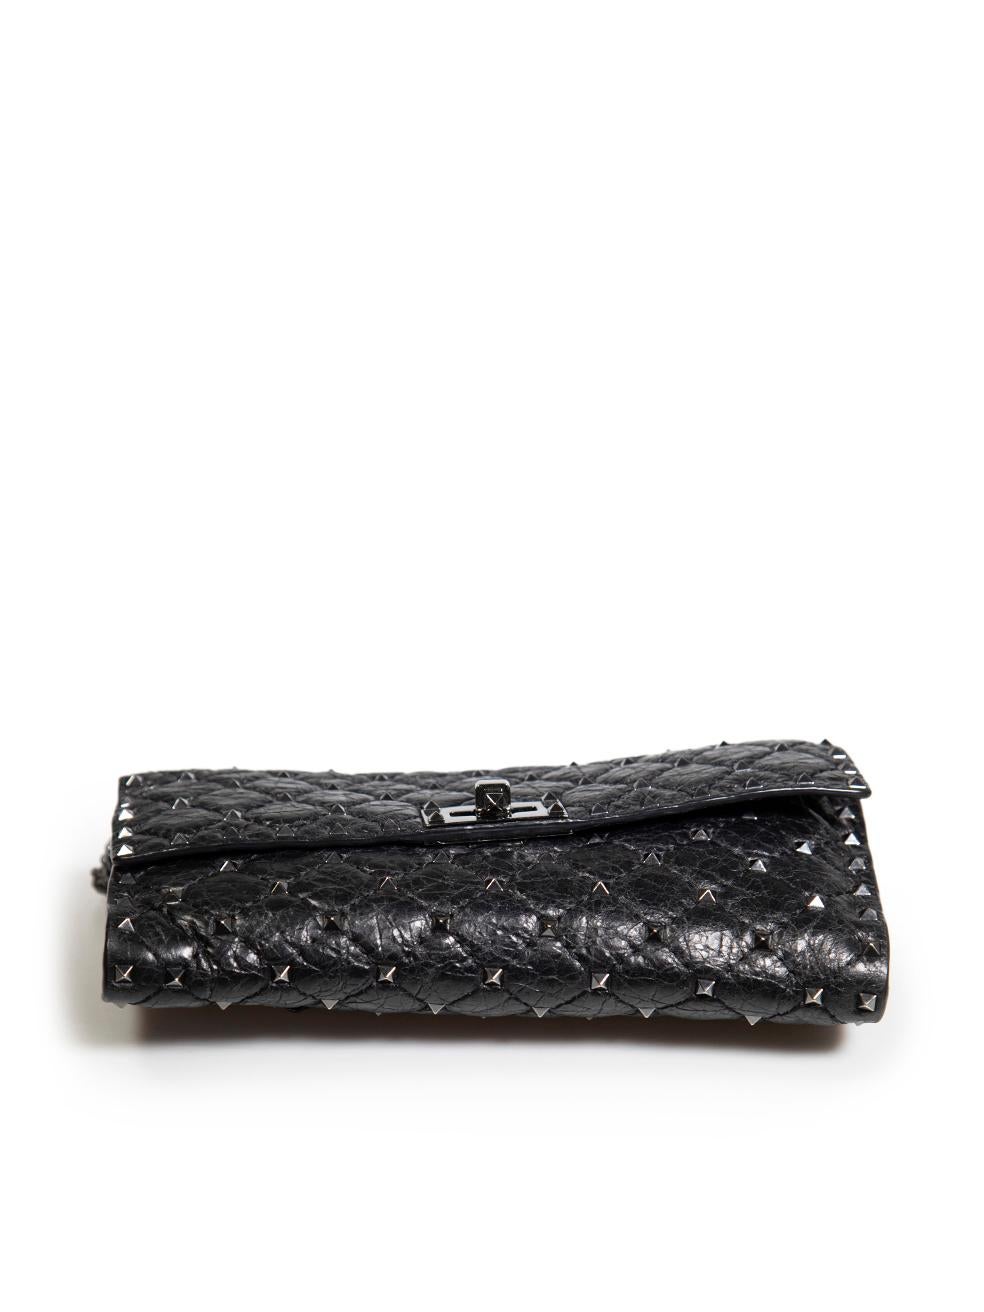 Women's Valentino Black Leather Nappa Rockstud Spike Wallet on Chain For Sale